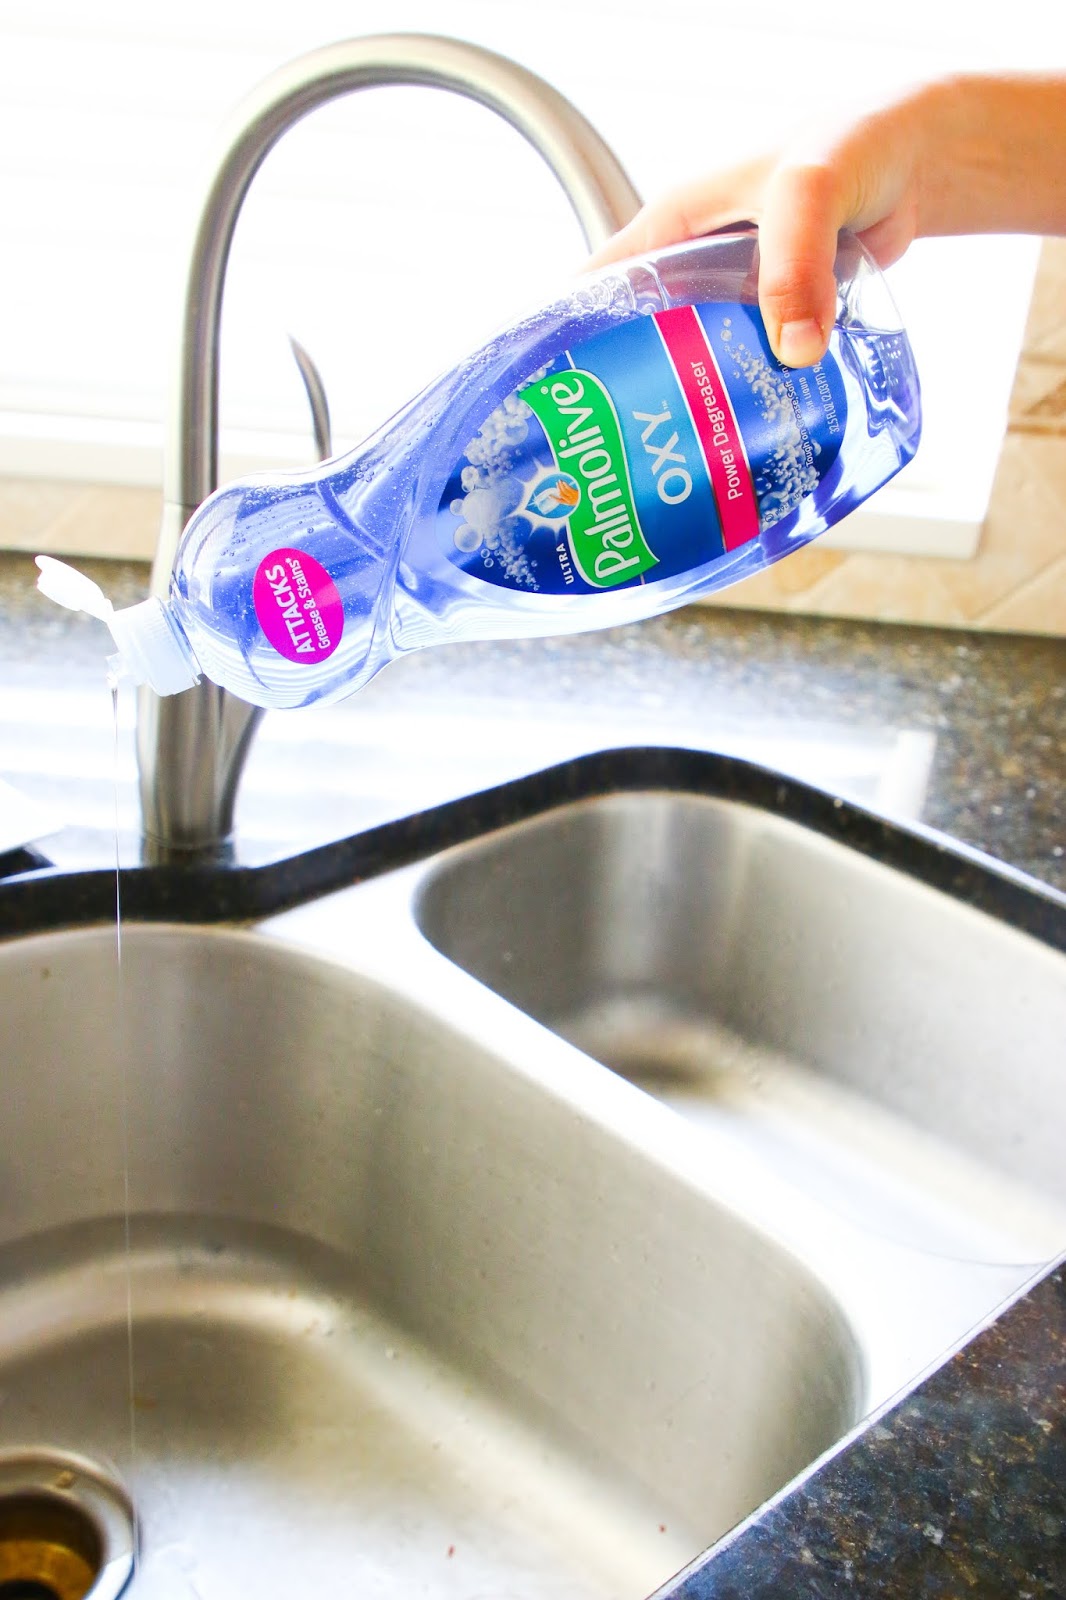 How to deep clean kitchen sink drain. Deep clean stainless steel sink. How to deep clean bathroom sink. How to deep clean a kitchen. How to clean kitchen sink with baking soda. Vinegar to clean kitchen sink. How to clean kitchen sink strainer. How to lean kitchen sink stains. #cleaning #kitchen #deepclean #cleaningroutin #home #motherhoood #parenting